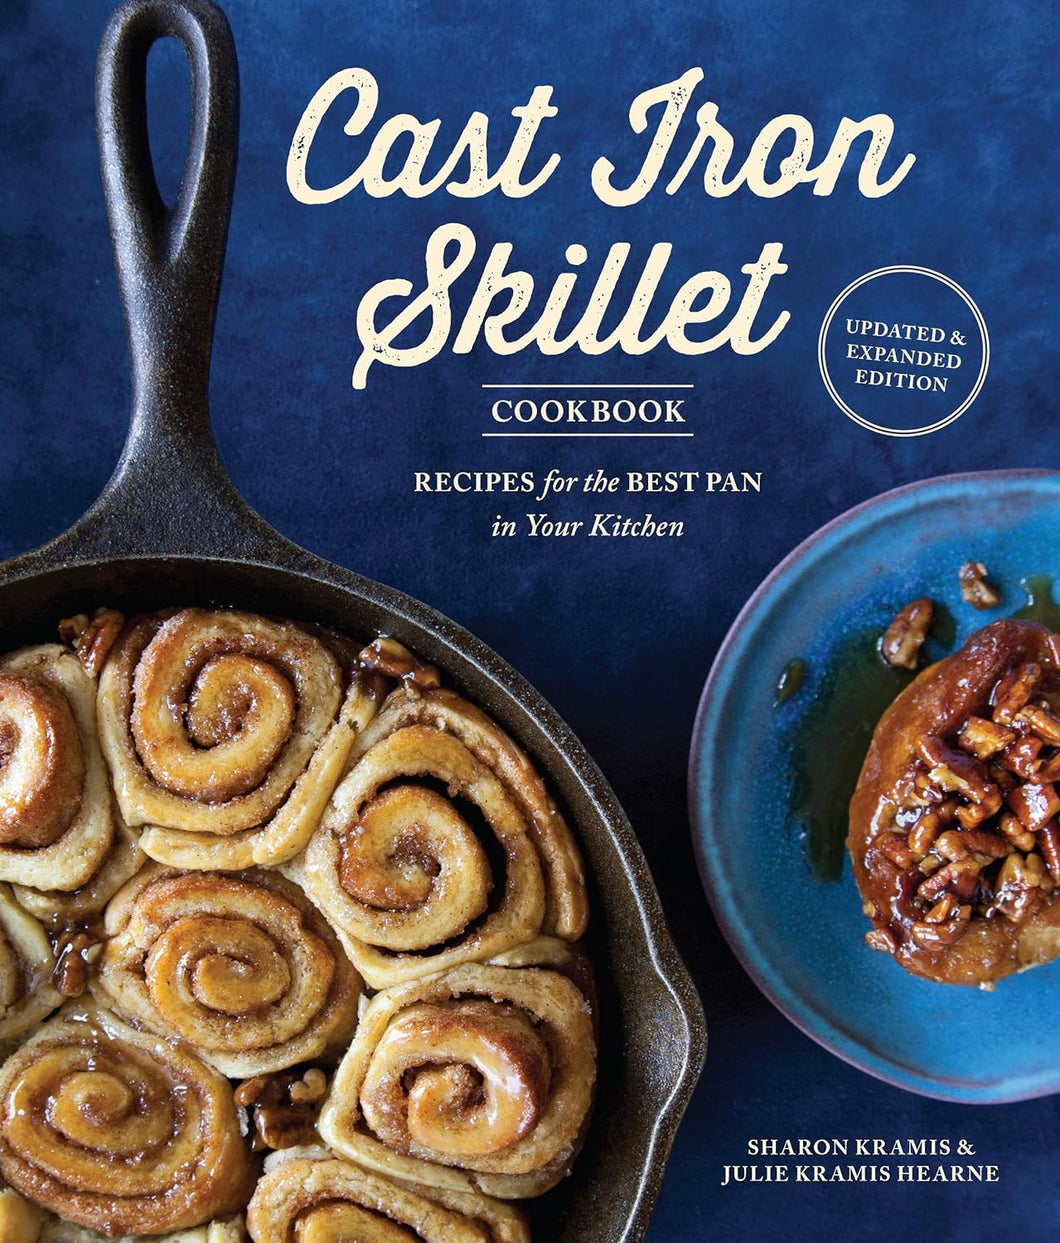 The Cast Iron Skillet Cookbook, 2nd Edition: Recipes for the Best Pan in Your Kitchen by Sharon Kramis